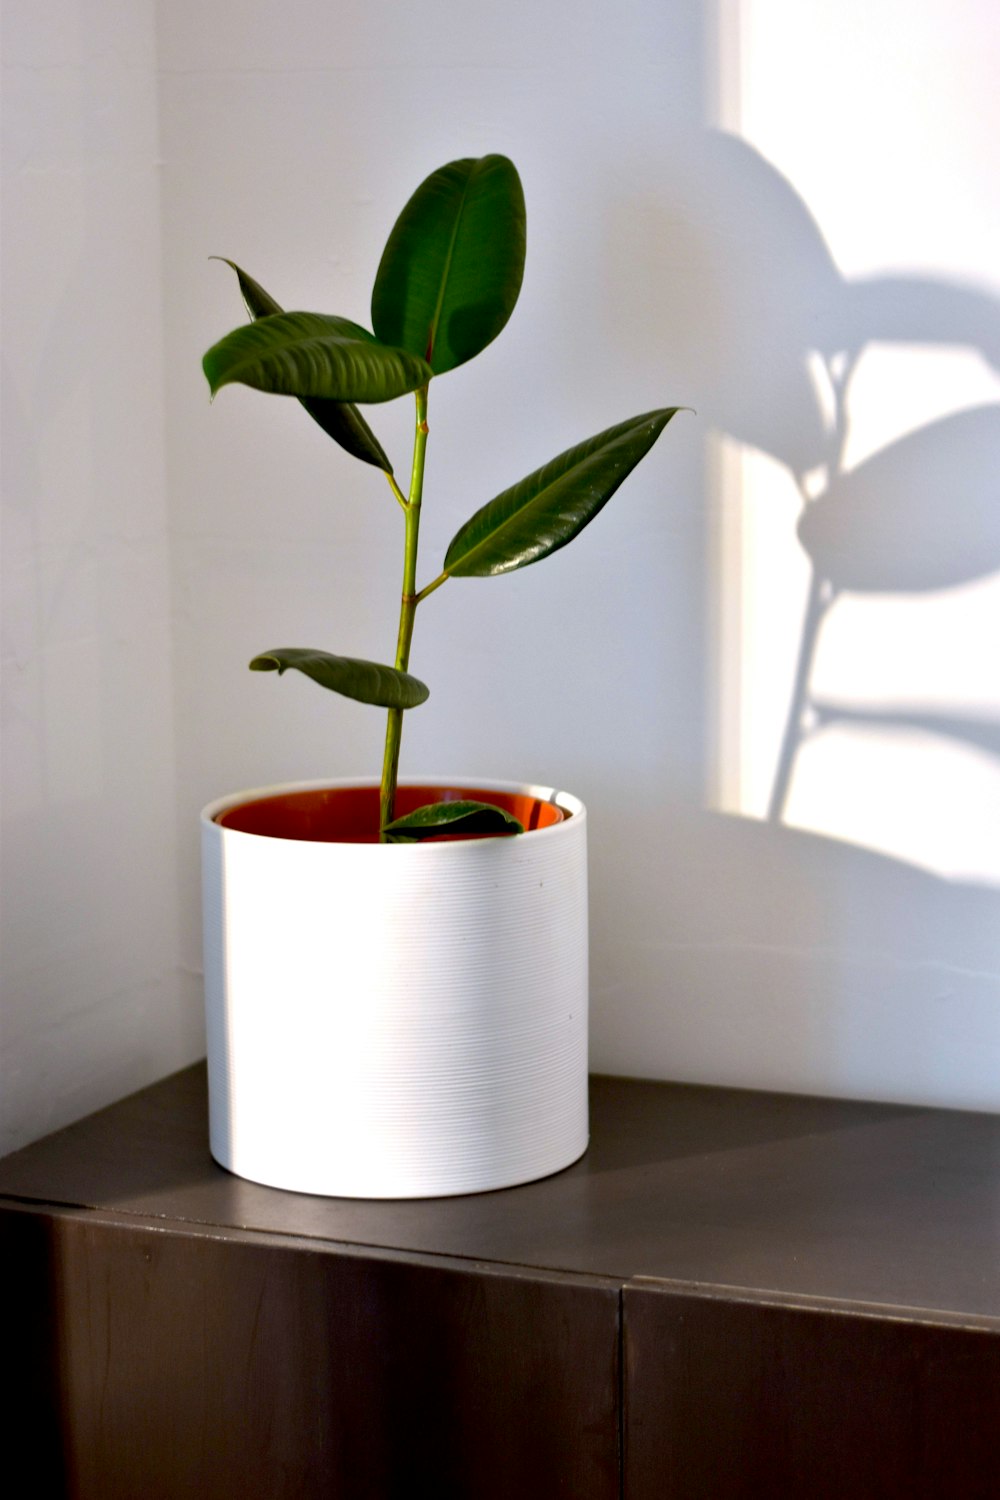 green rubber fig in pot